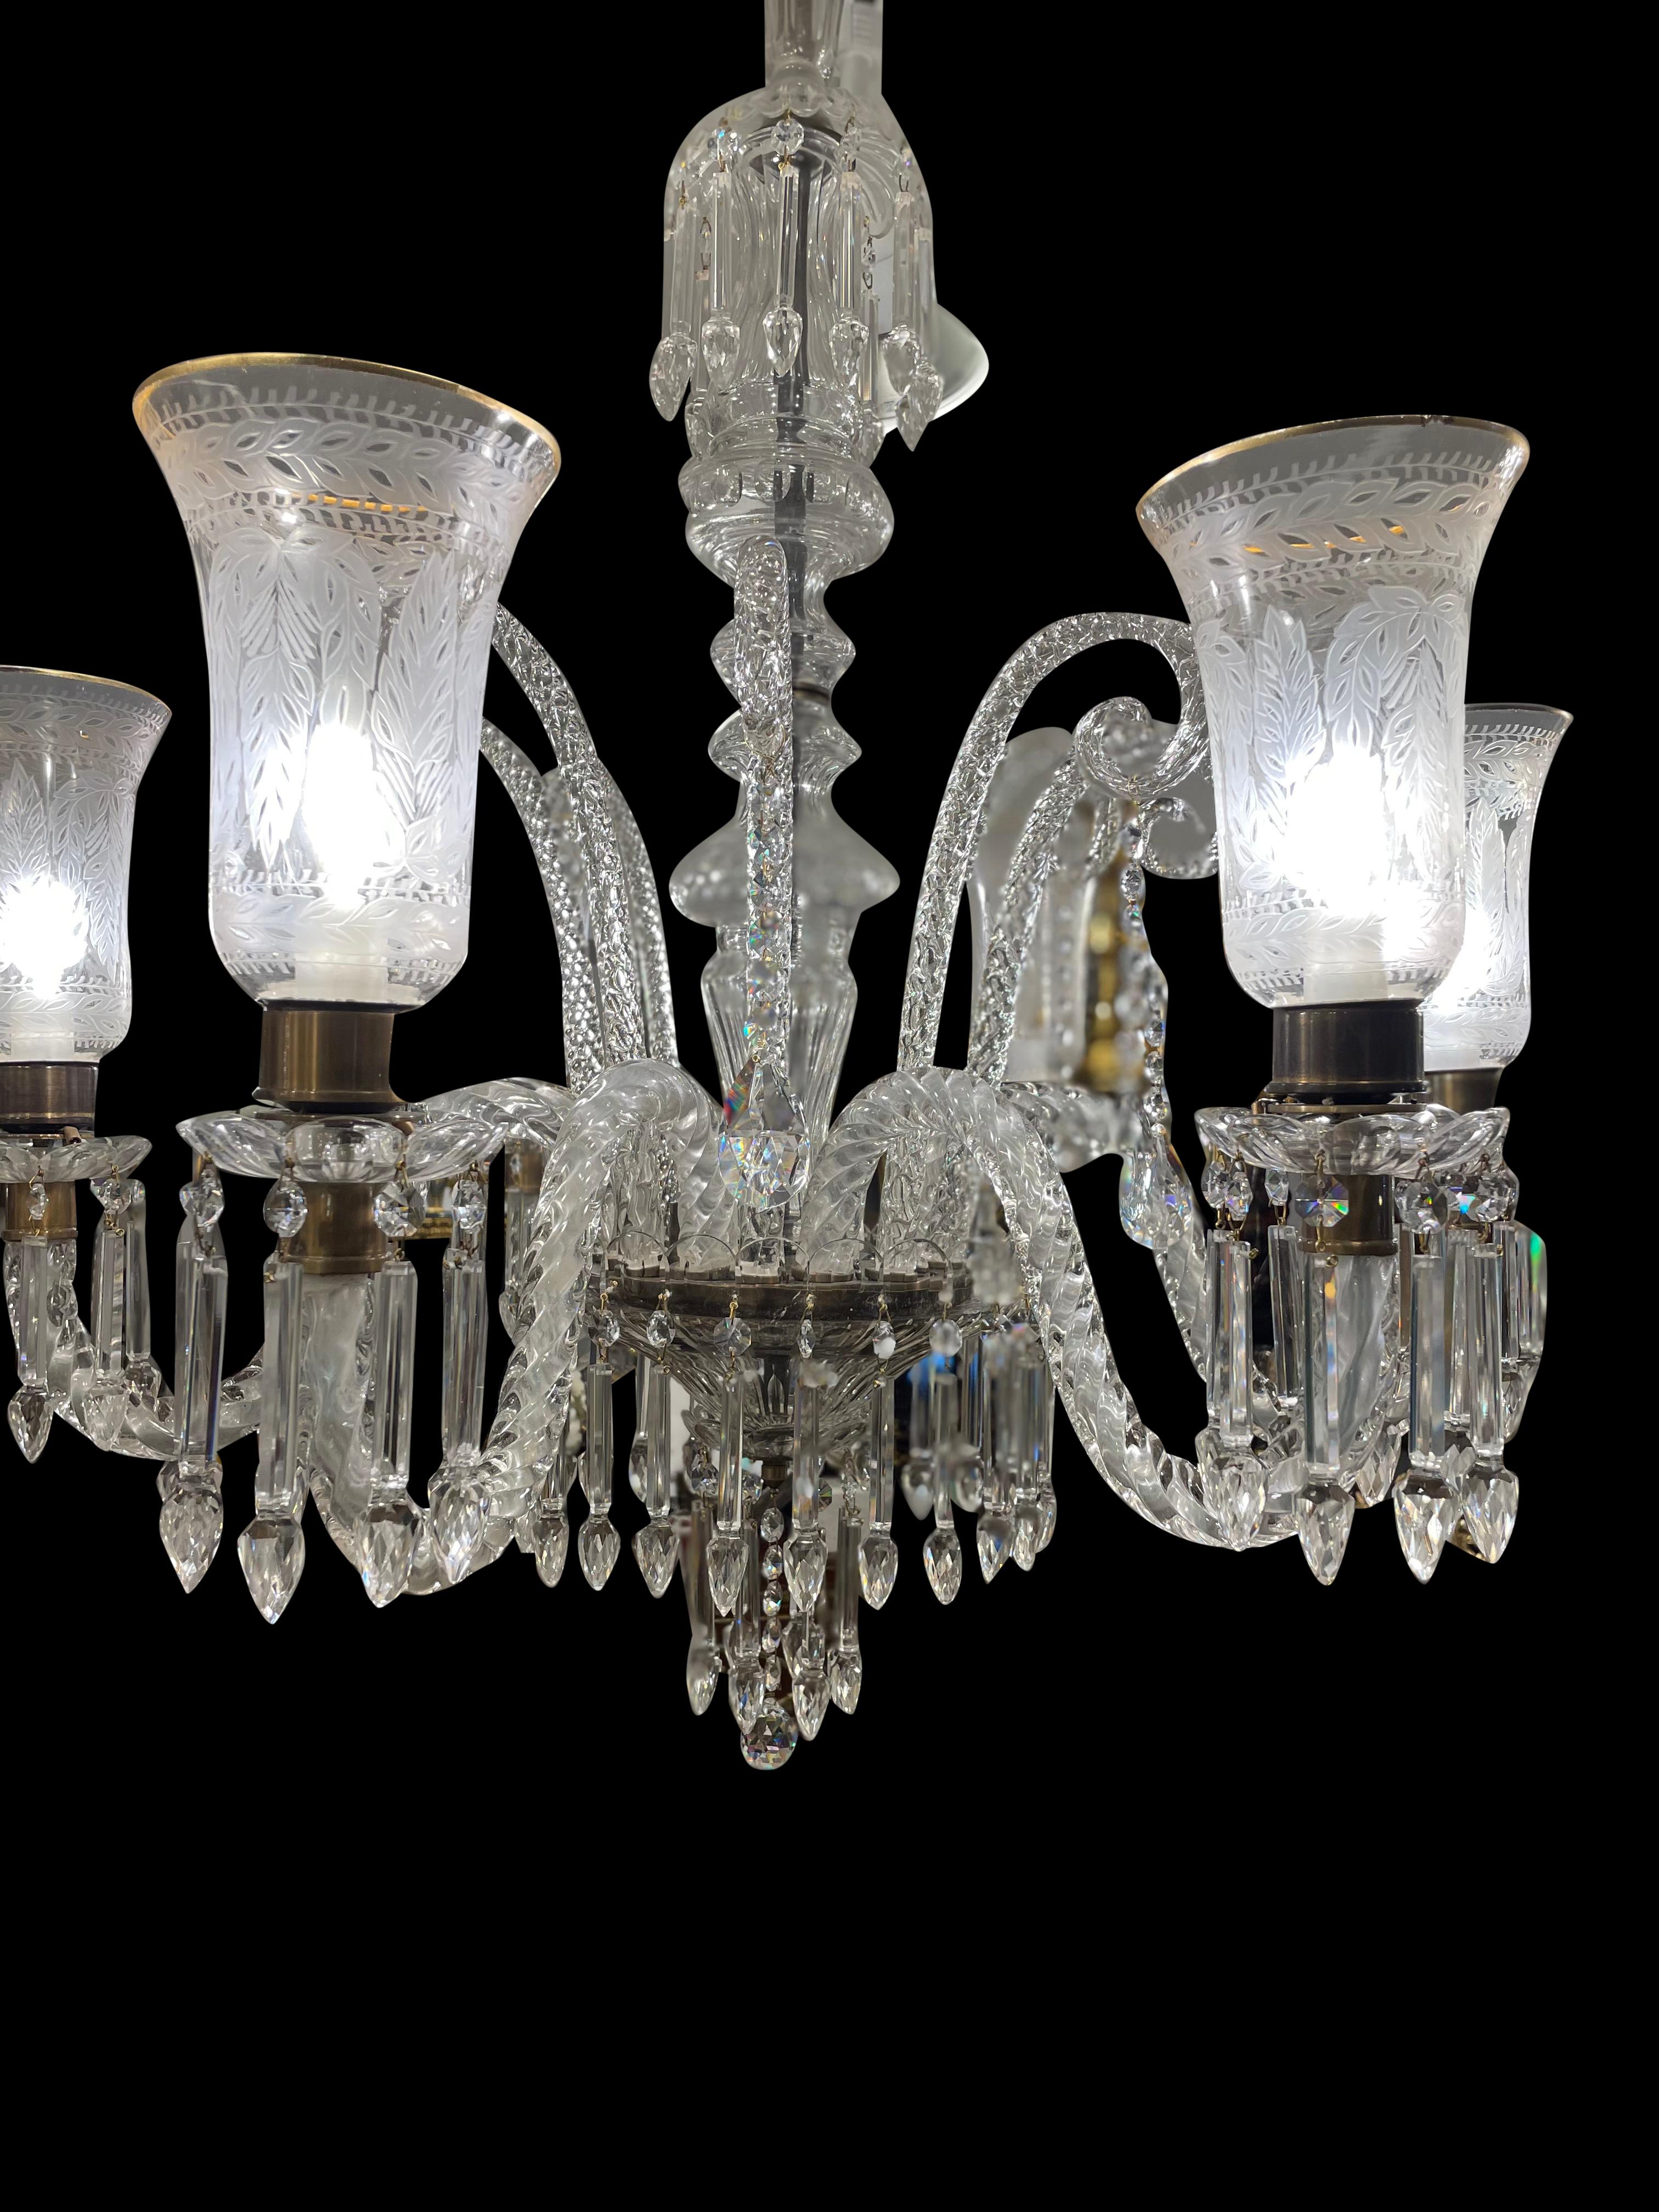 Cut Crystal Chandelier with Engraved Hurricane Shades, 20th Century For Sale 4